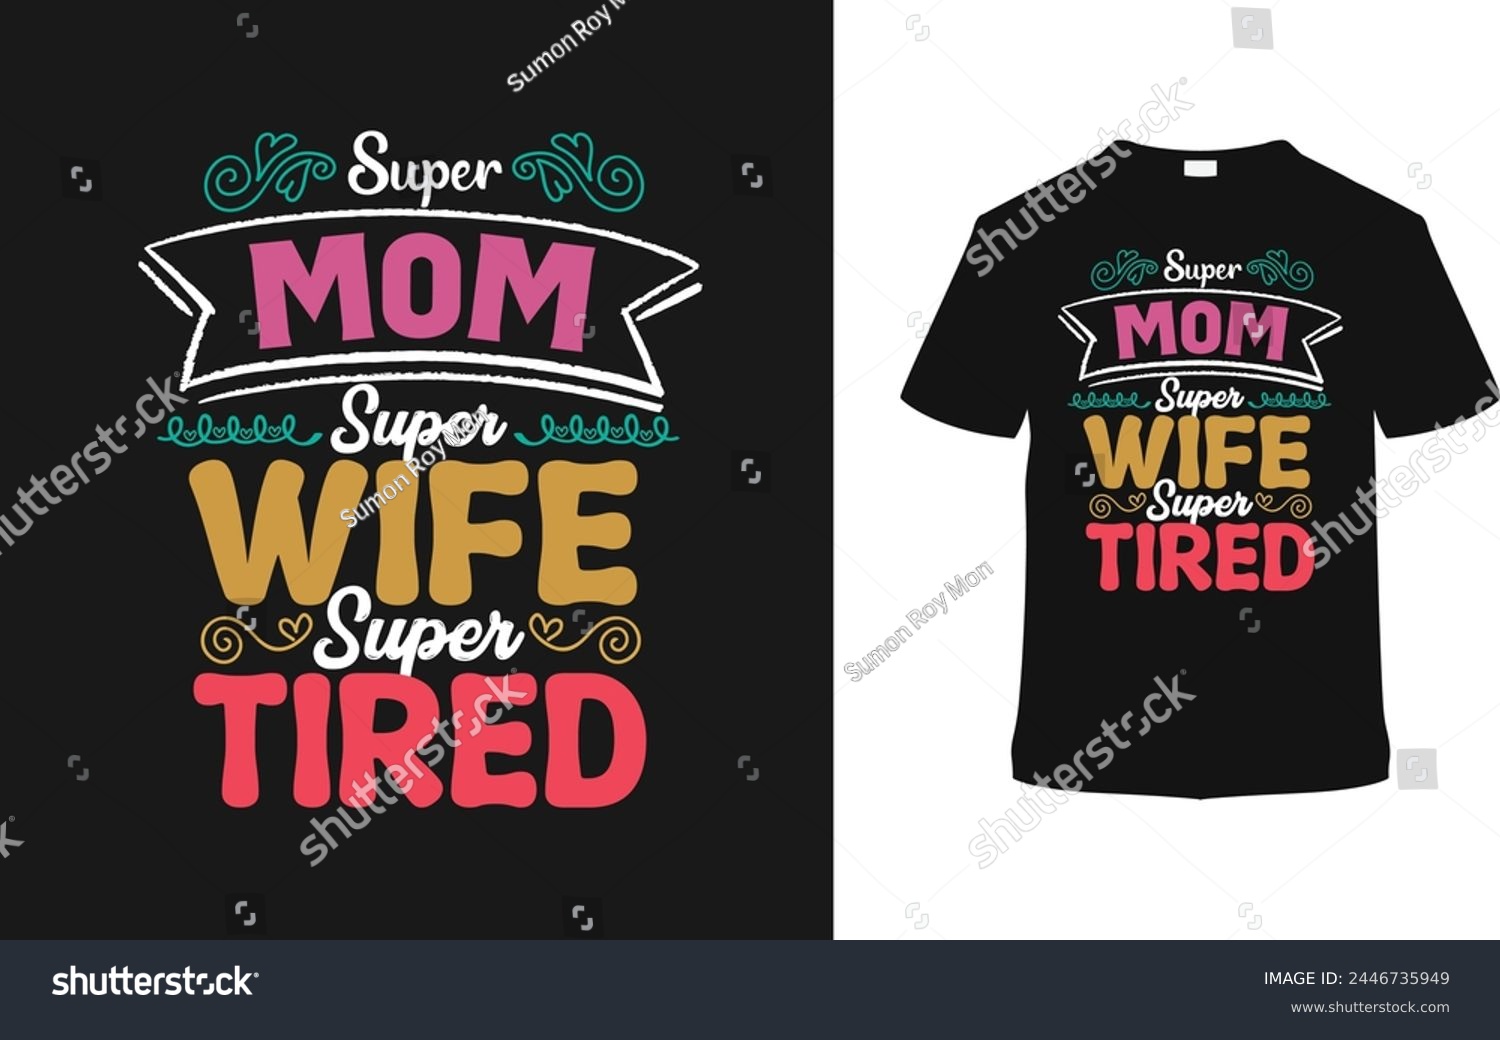 SVG of Super Mom Super Wife Super Tired Typography T-shirt, vector illustration, graphic template, print on demand, vintage, eps 10, textile fabrics, retro style, element, apparel, mothers day t shirt design svg